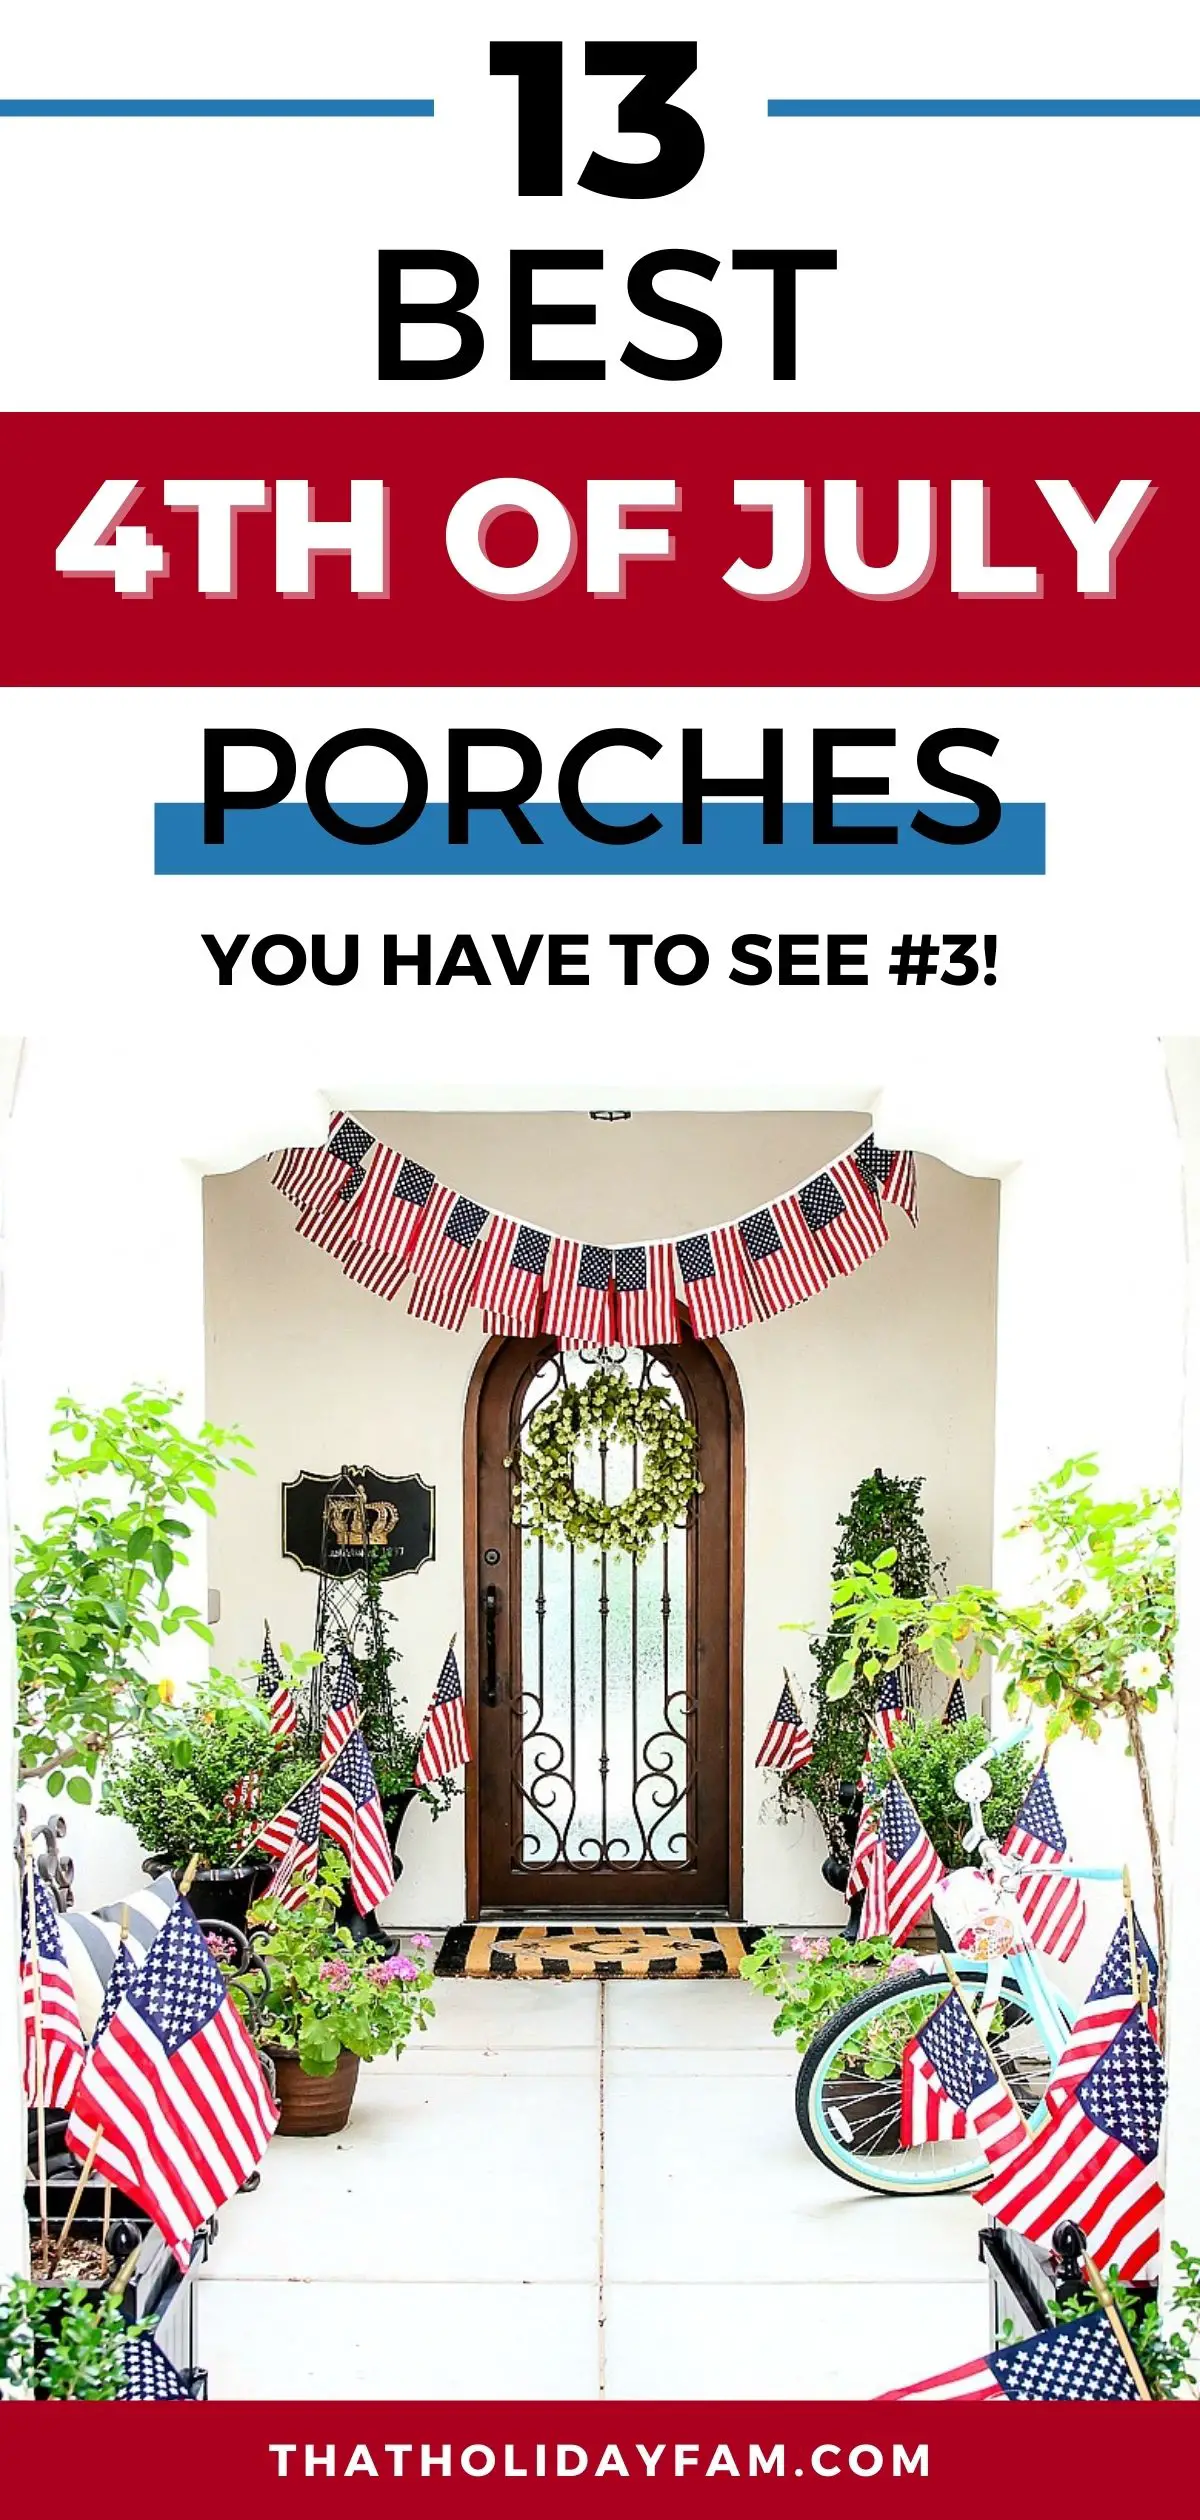 4th of july porch decorations